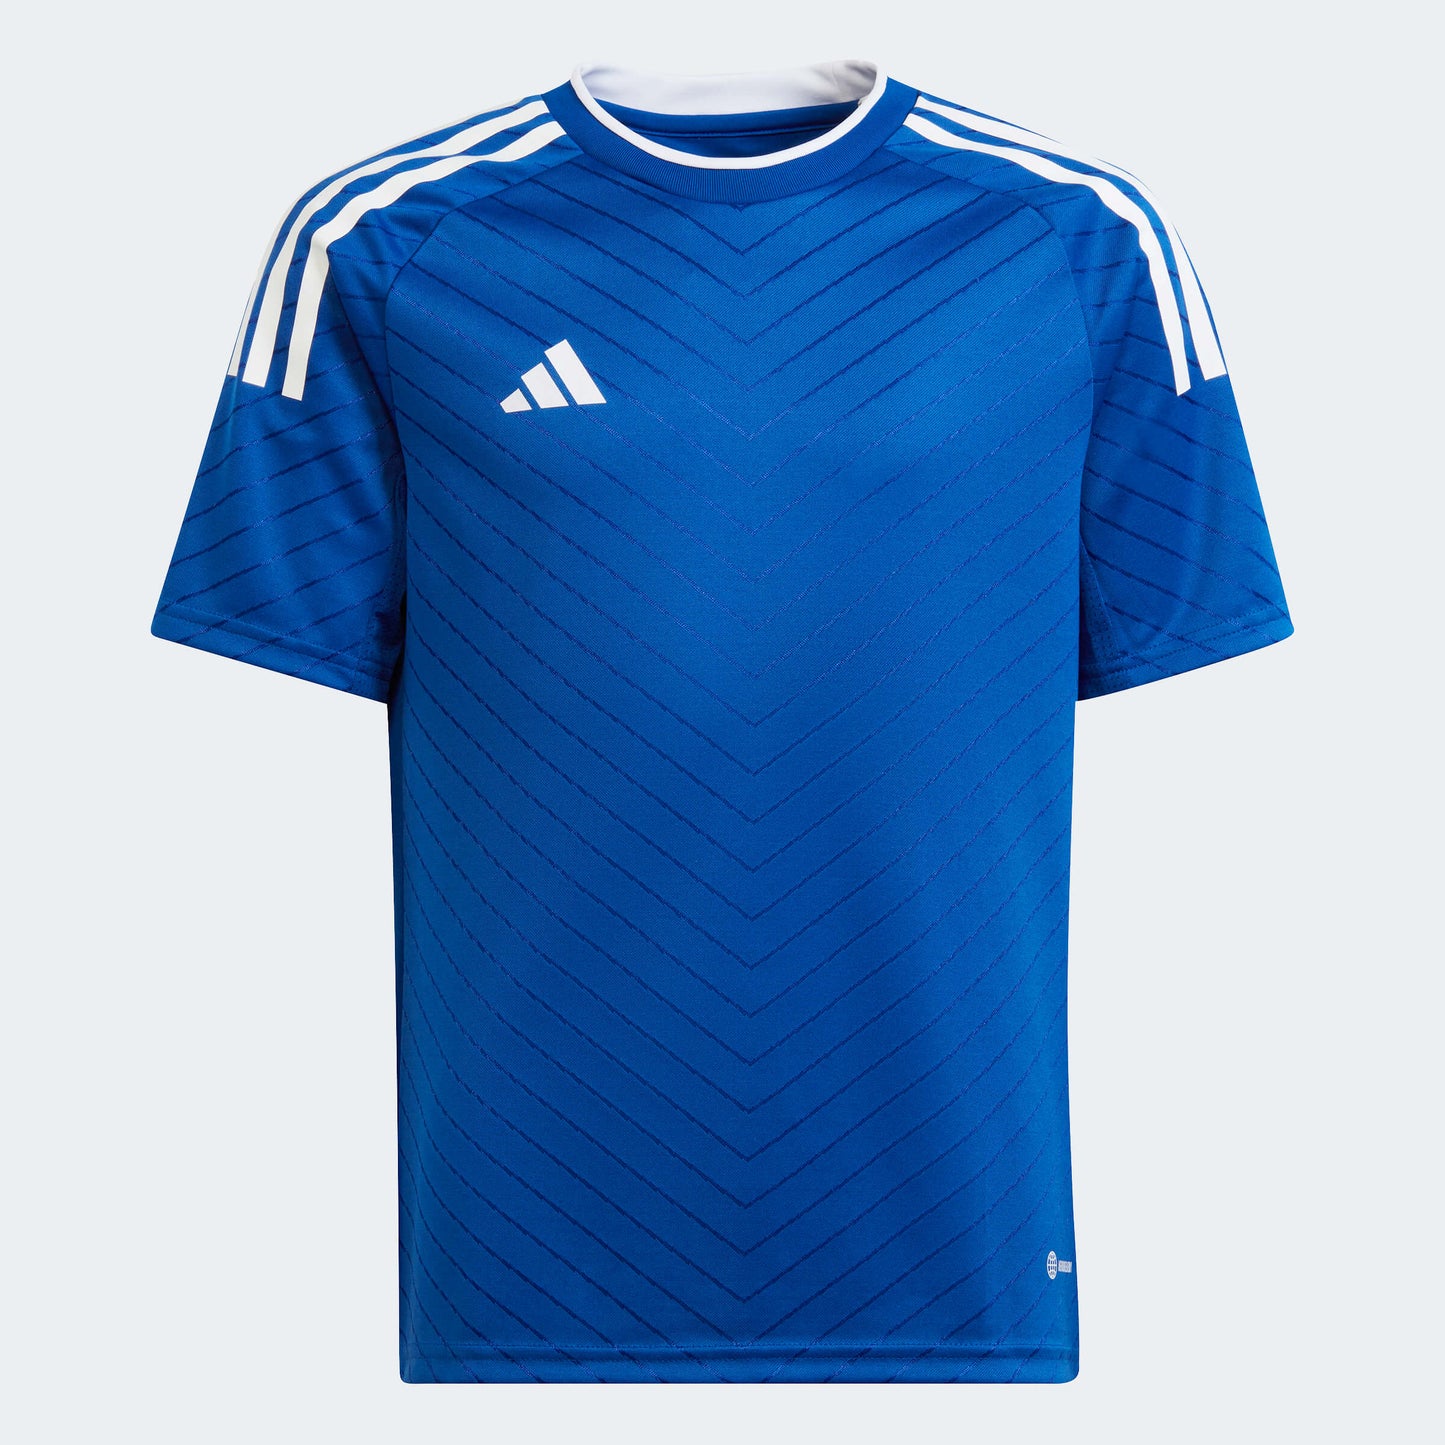 adidas YOUTH Campeon 23 Jersey Team Royal Blue (Front)